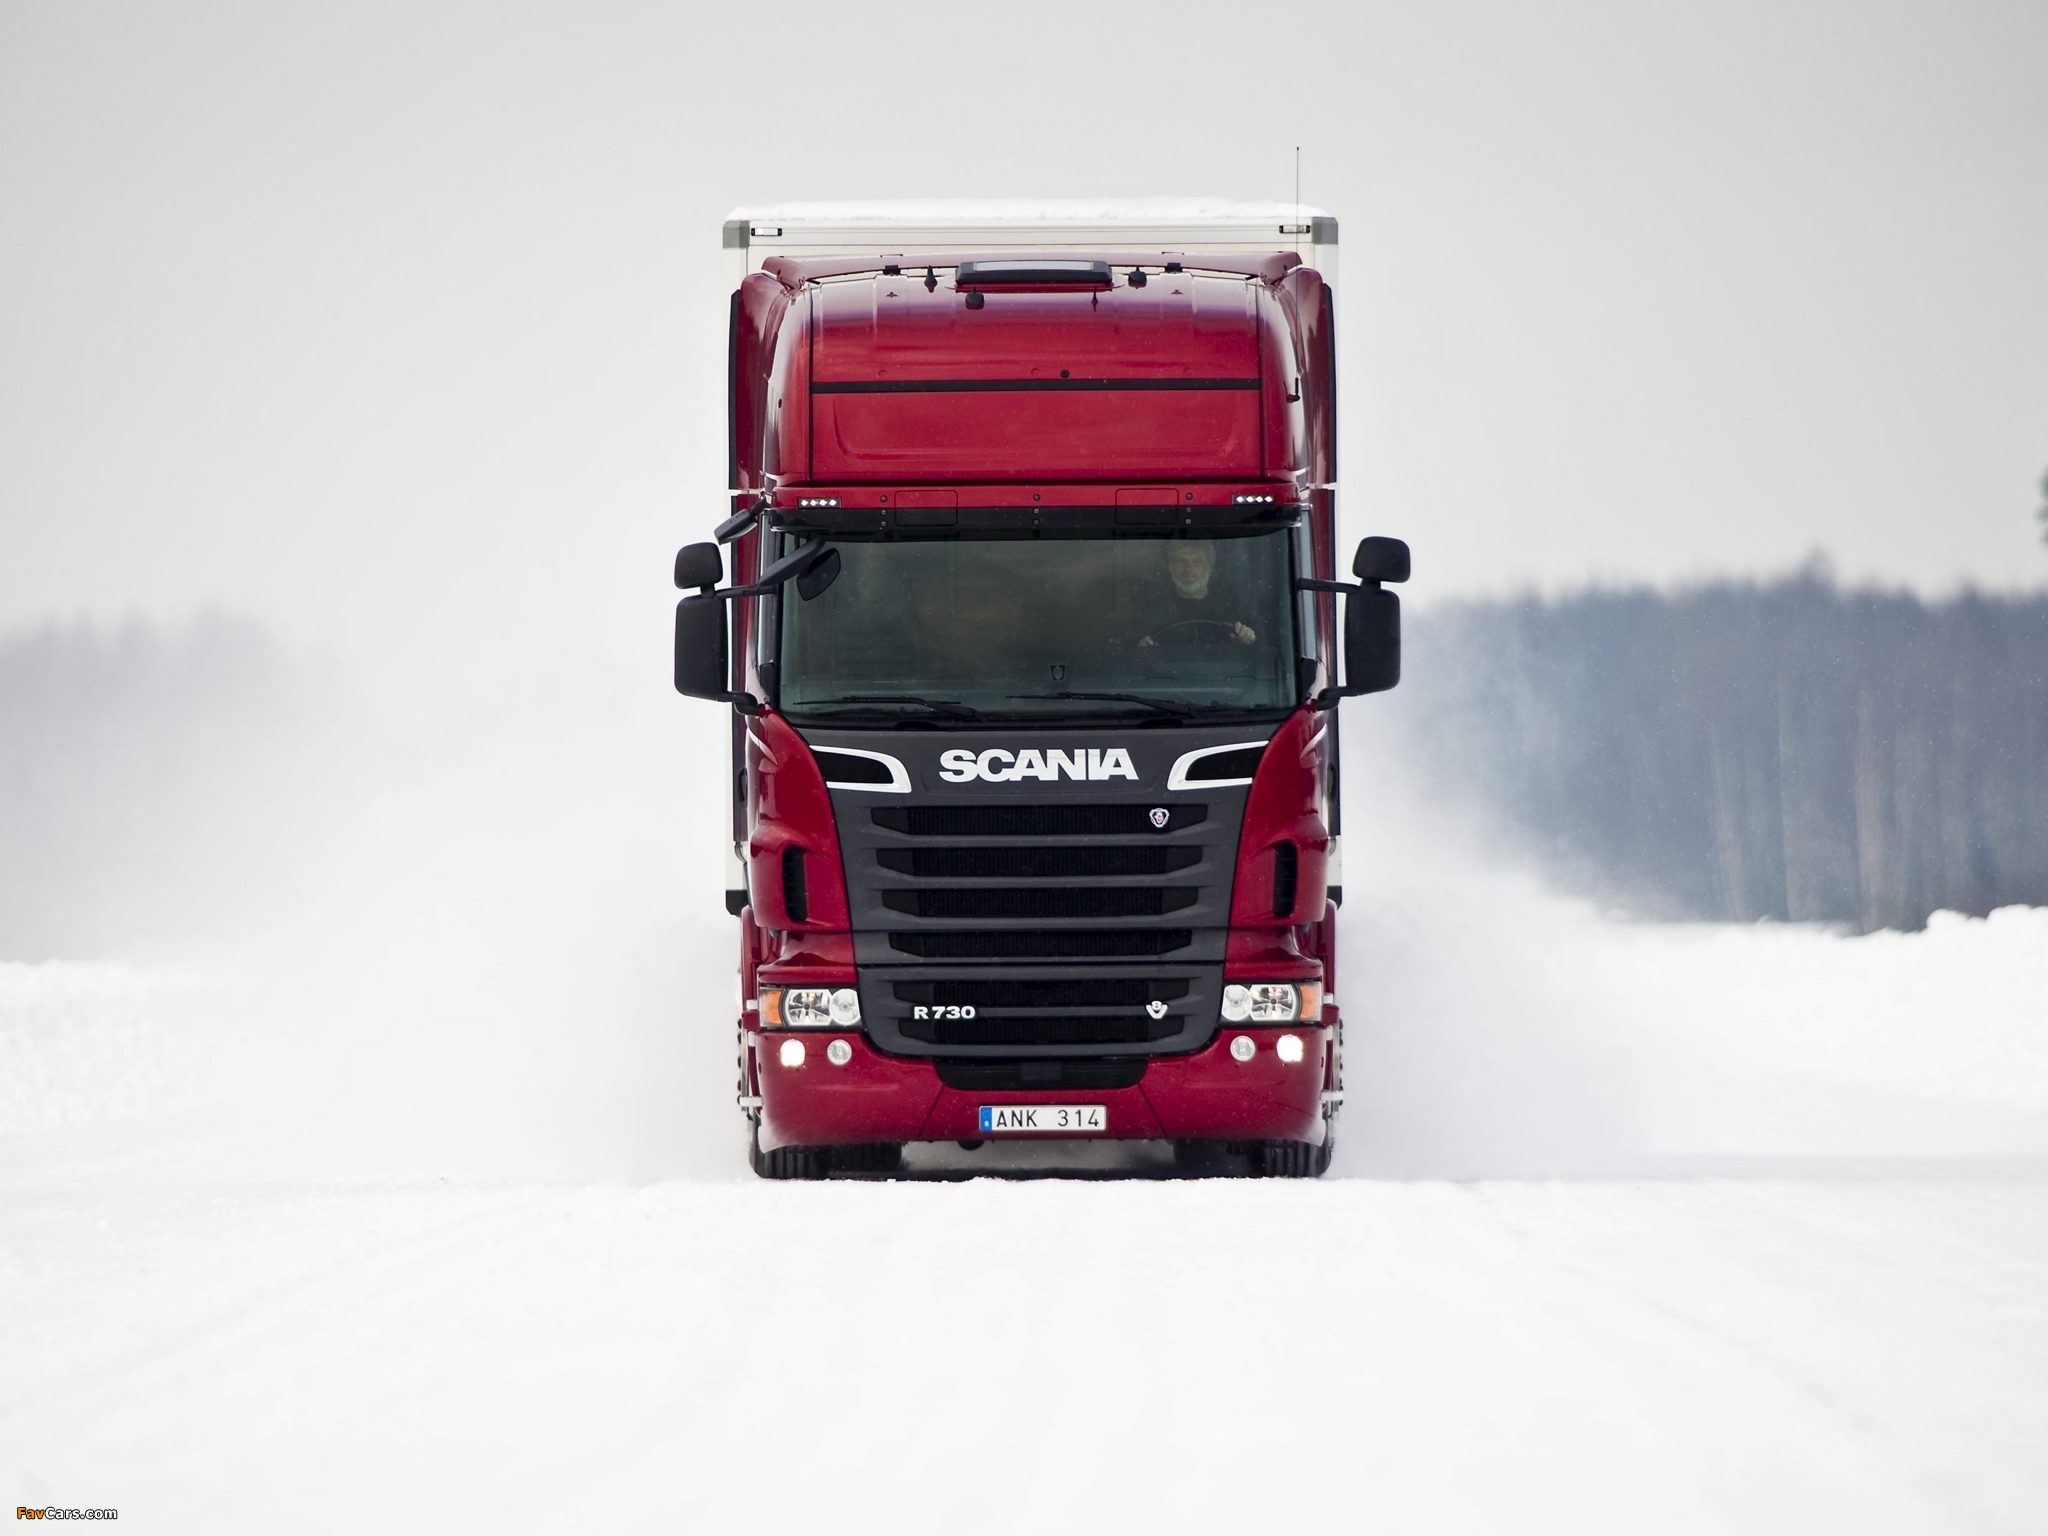 Excellent Scania Backgrounds High Hd Quality For Pc - Scania R730 Wallpaper Hd - HD Wallpaper 